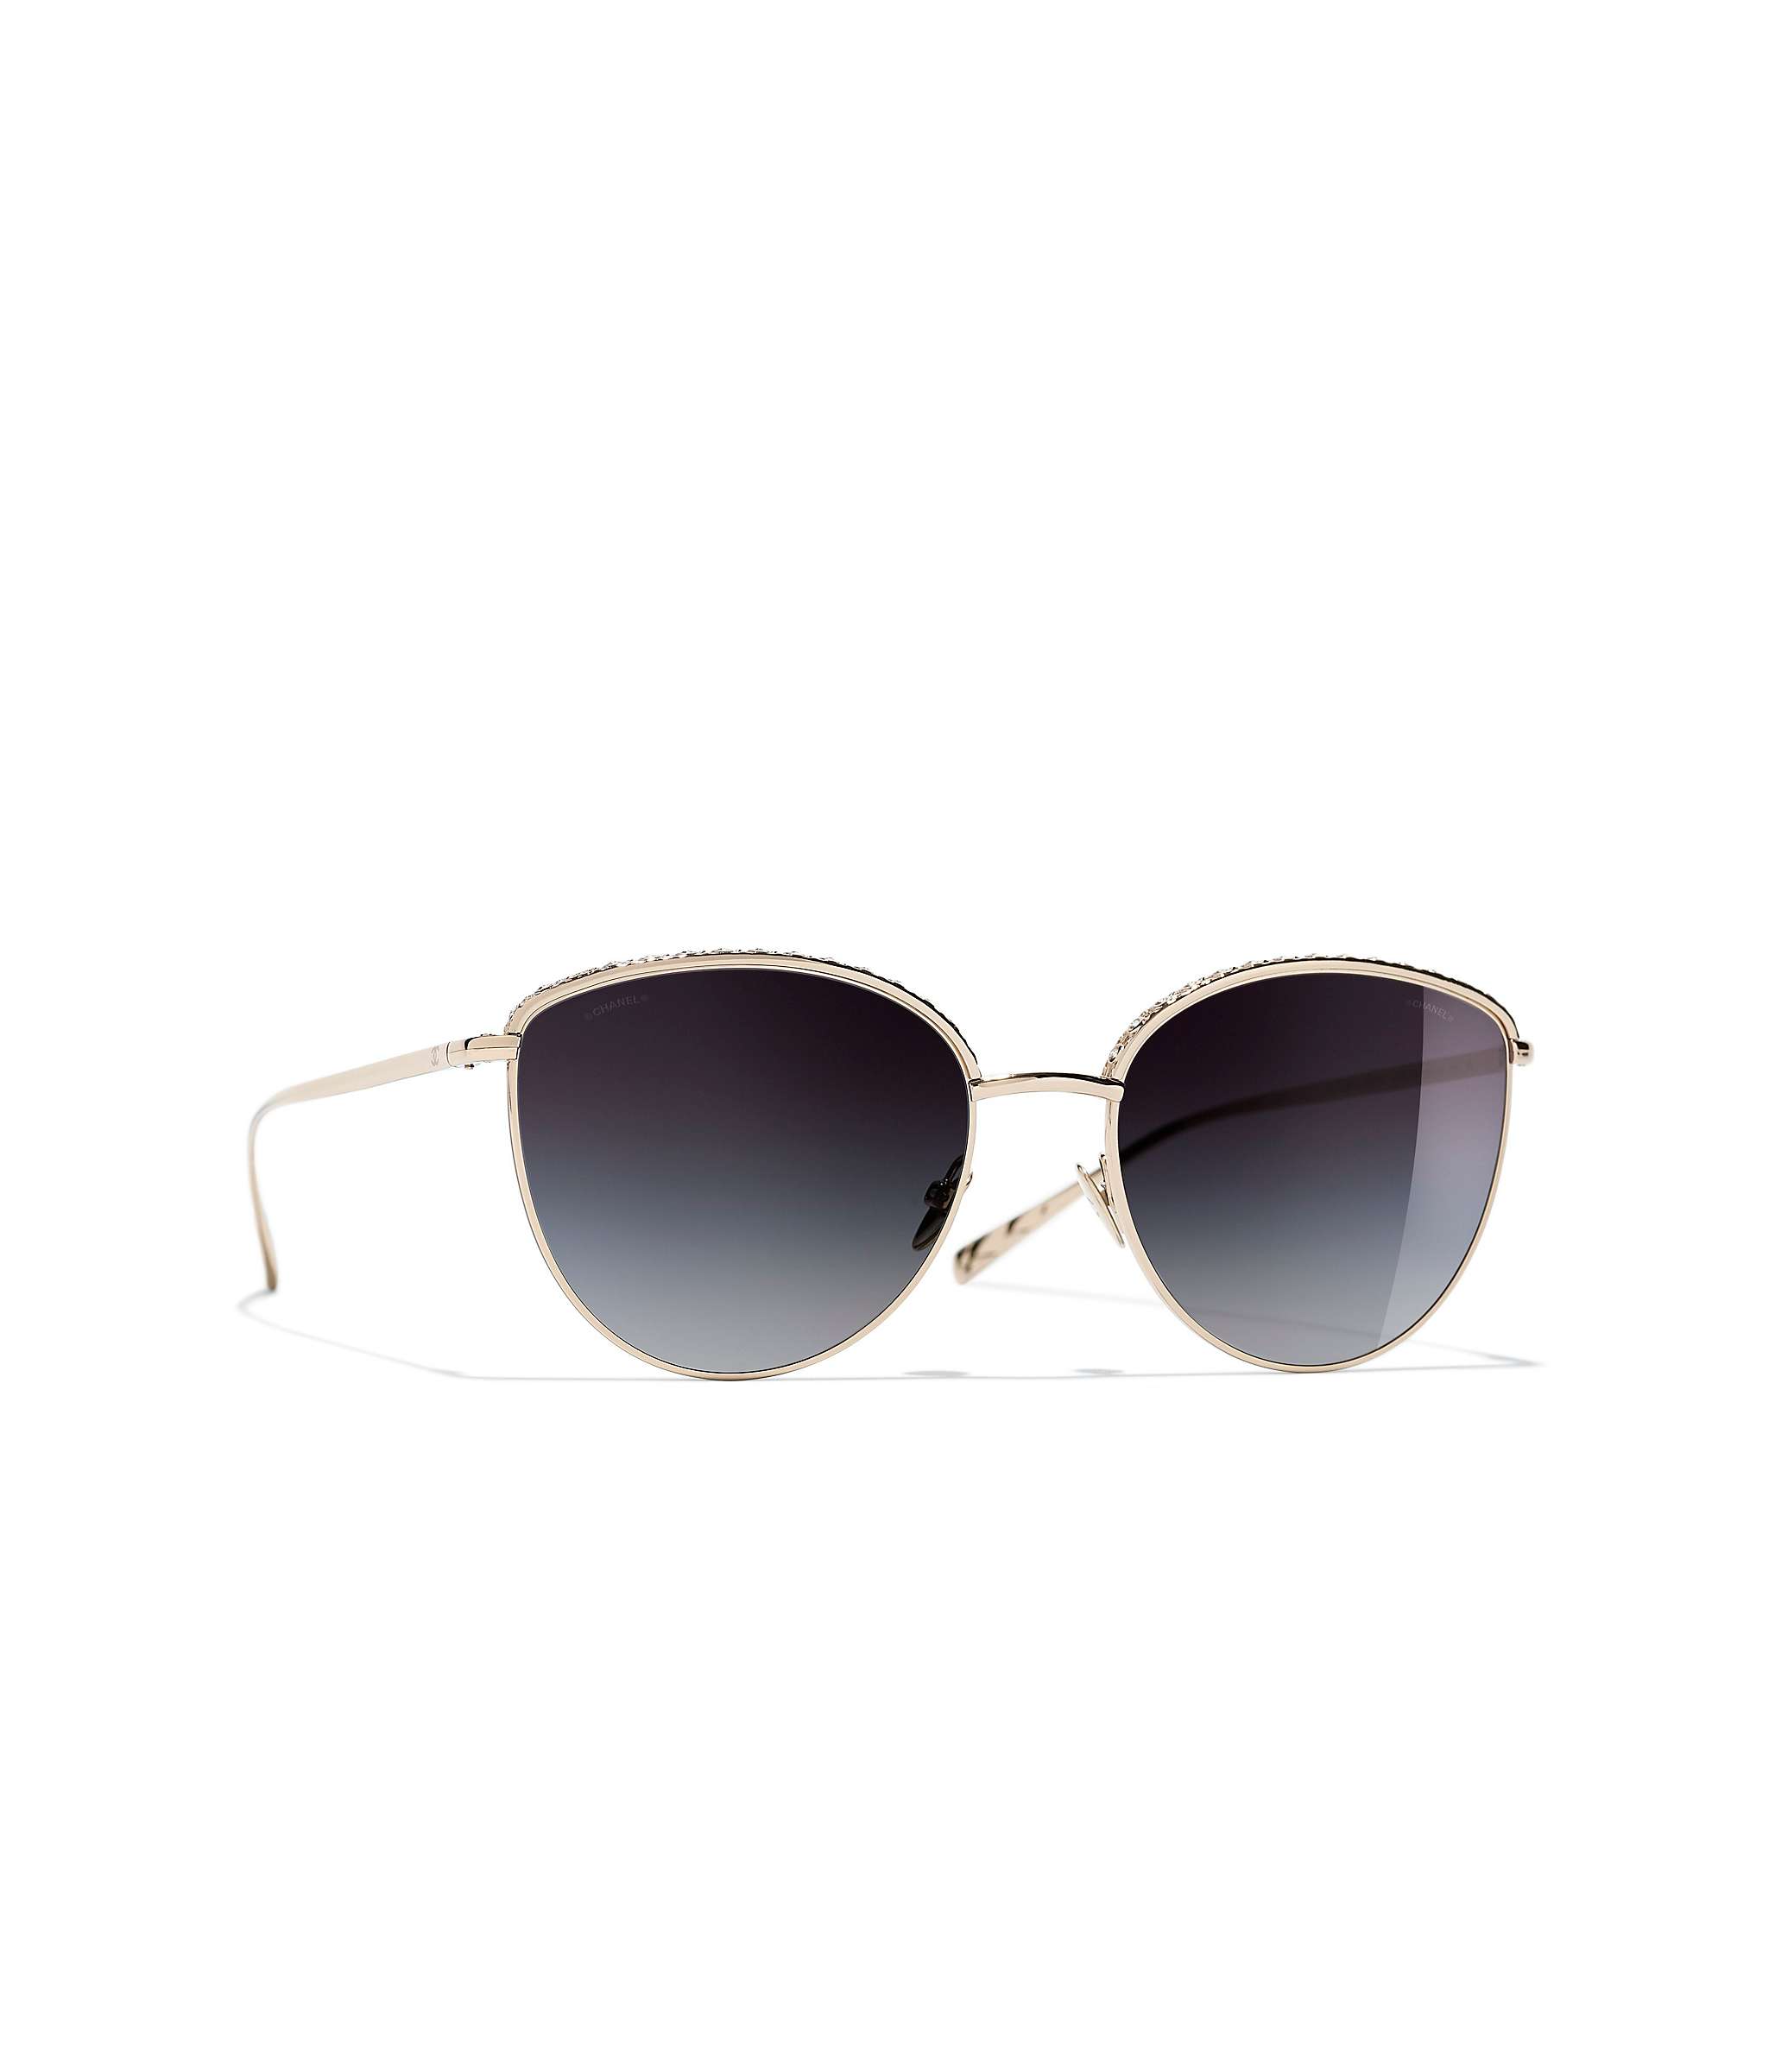 Buy CHANEL Butterfly Sunglasses CH4258B Gold/Black Gradient Online at johnlewis.com